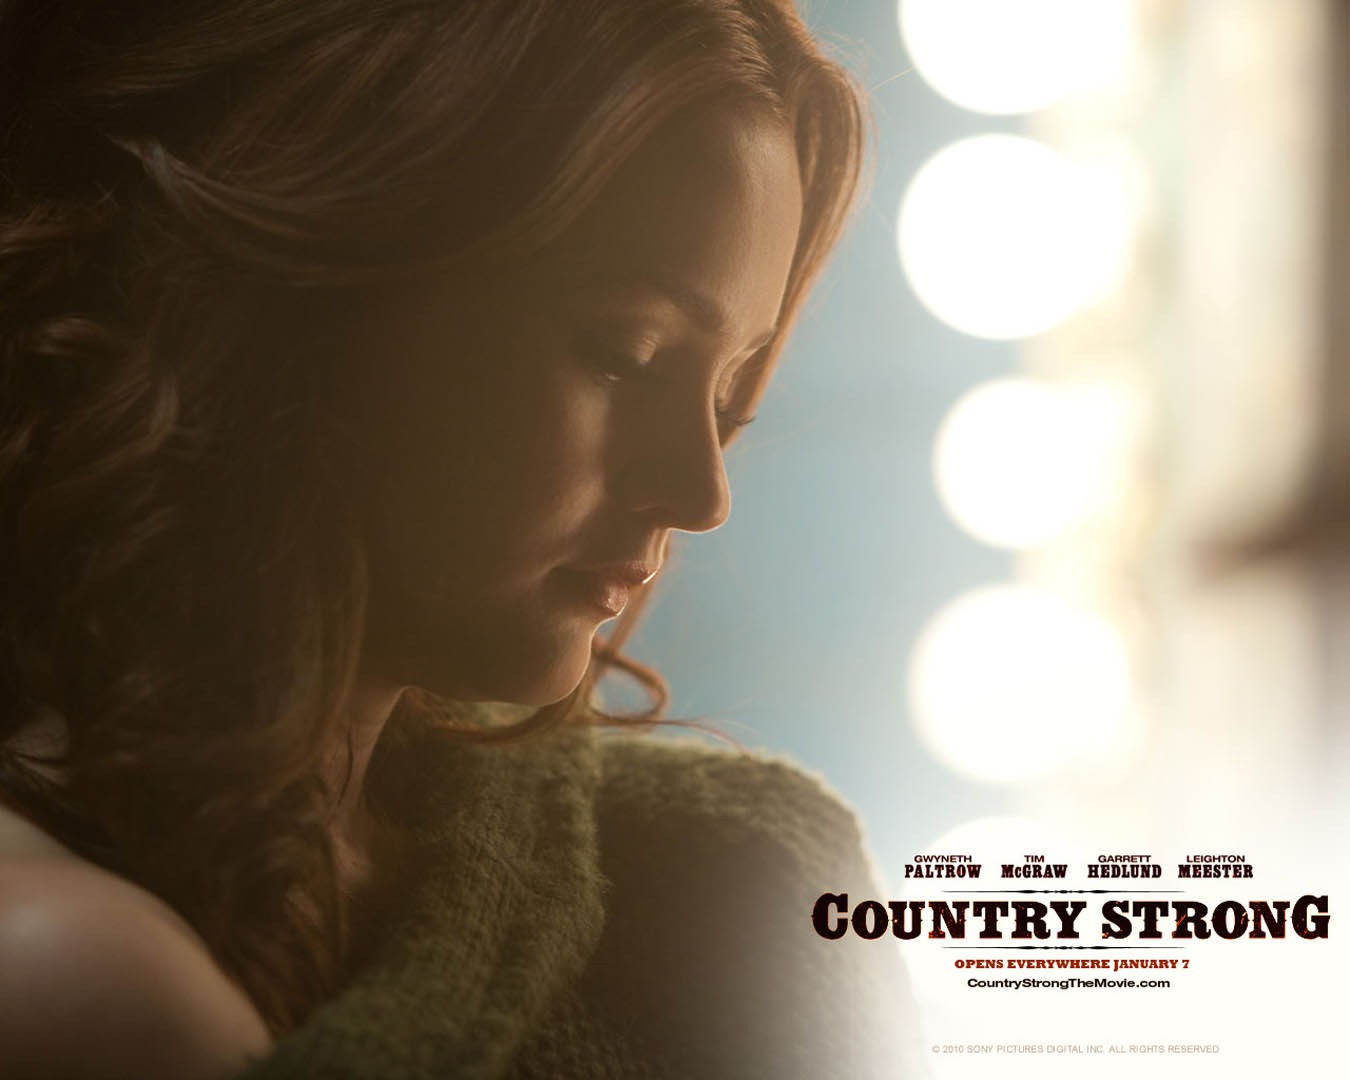 Musical Leighton Meester In Country Strong